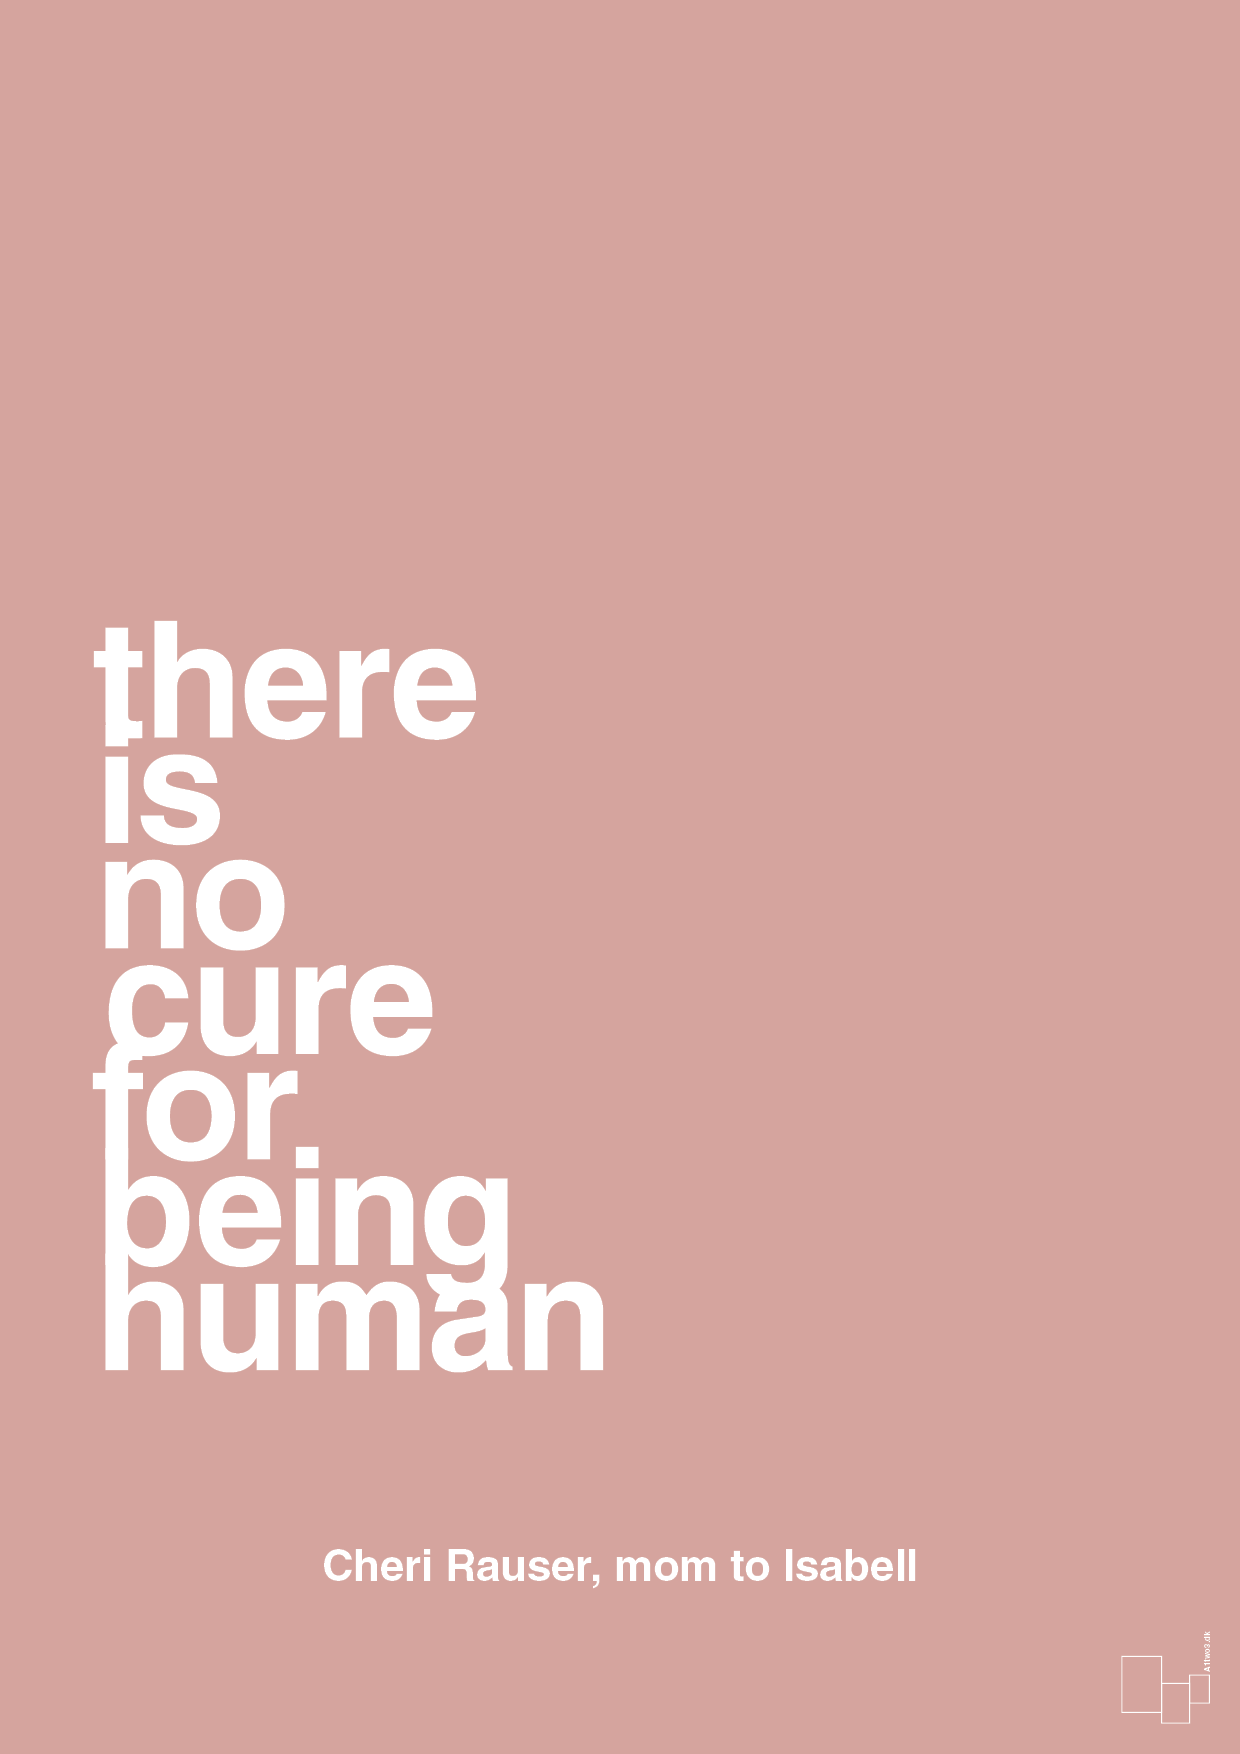 there is no cure for being human - Plakat med Samfund i Bubble Shell